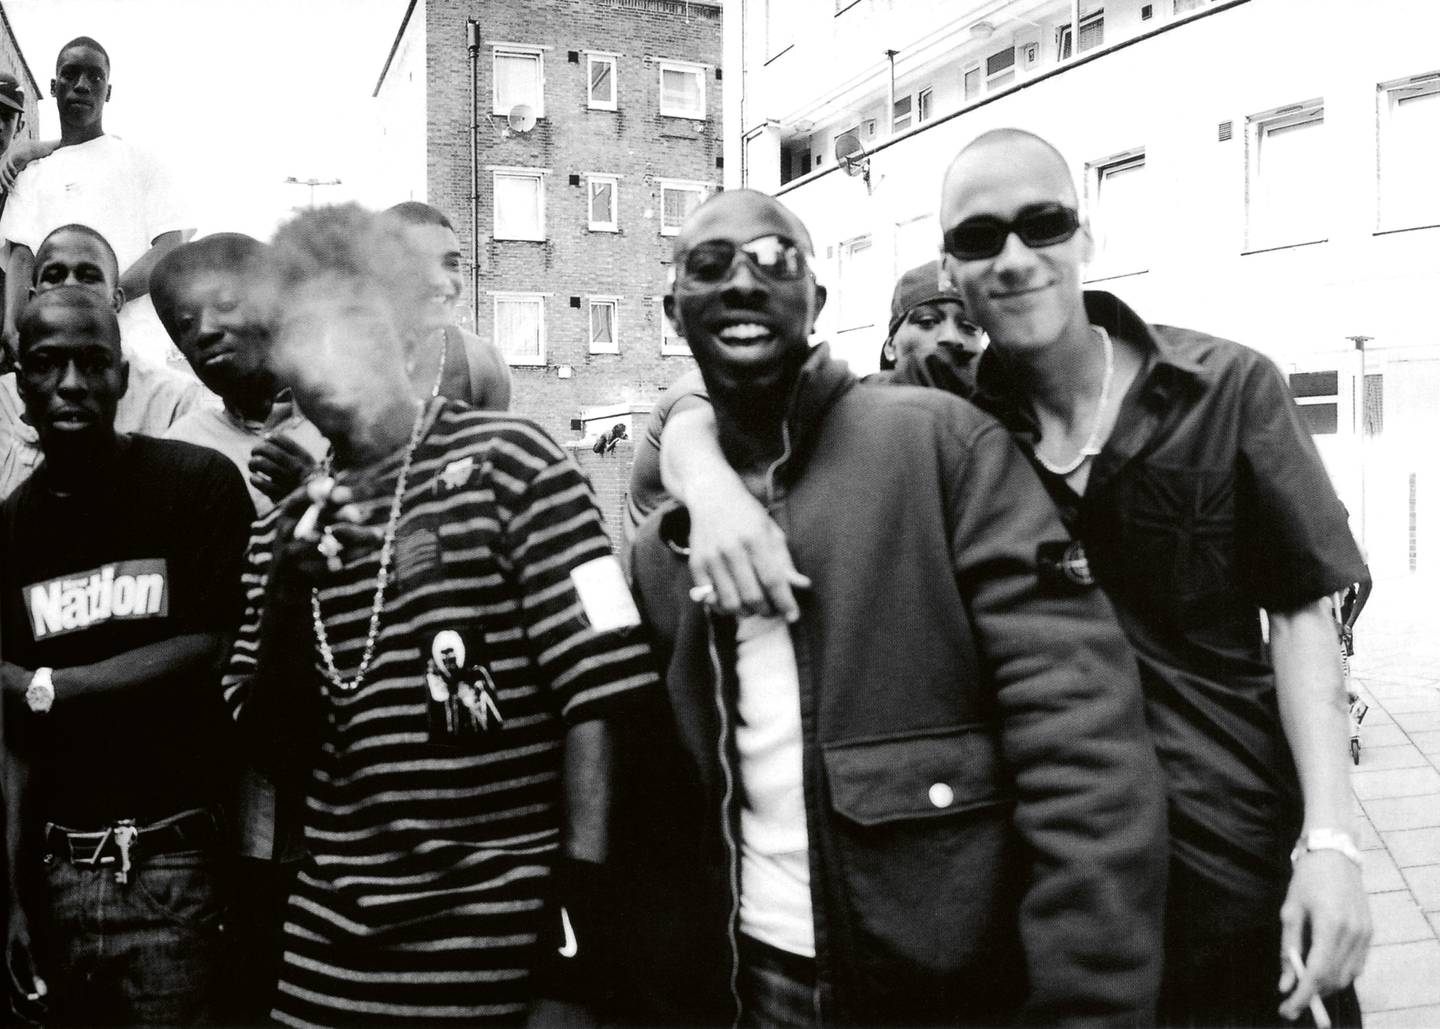 SO SOLID CREW THE FACE DECEMBER '001
PHOTO BY PHIL KNOTT